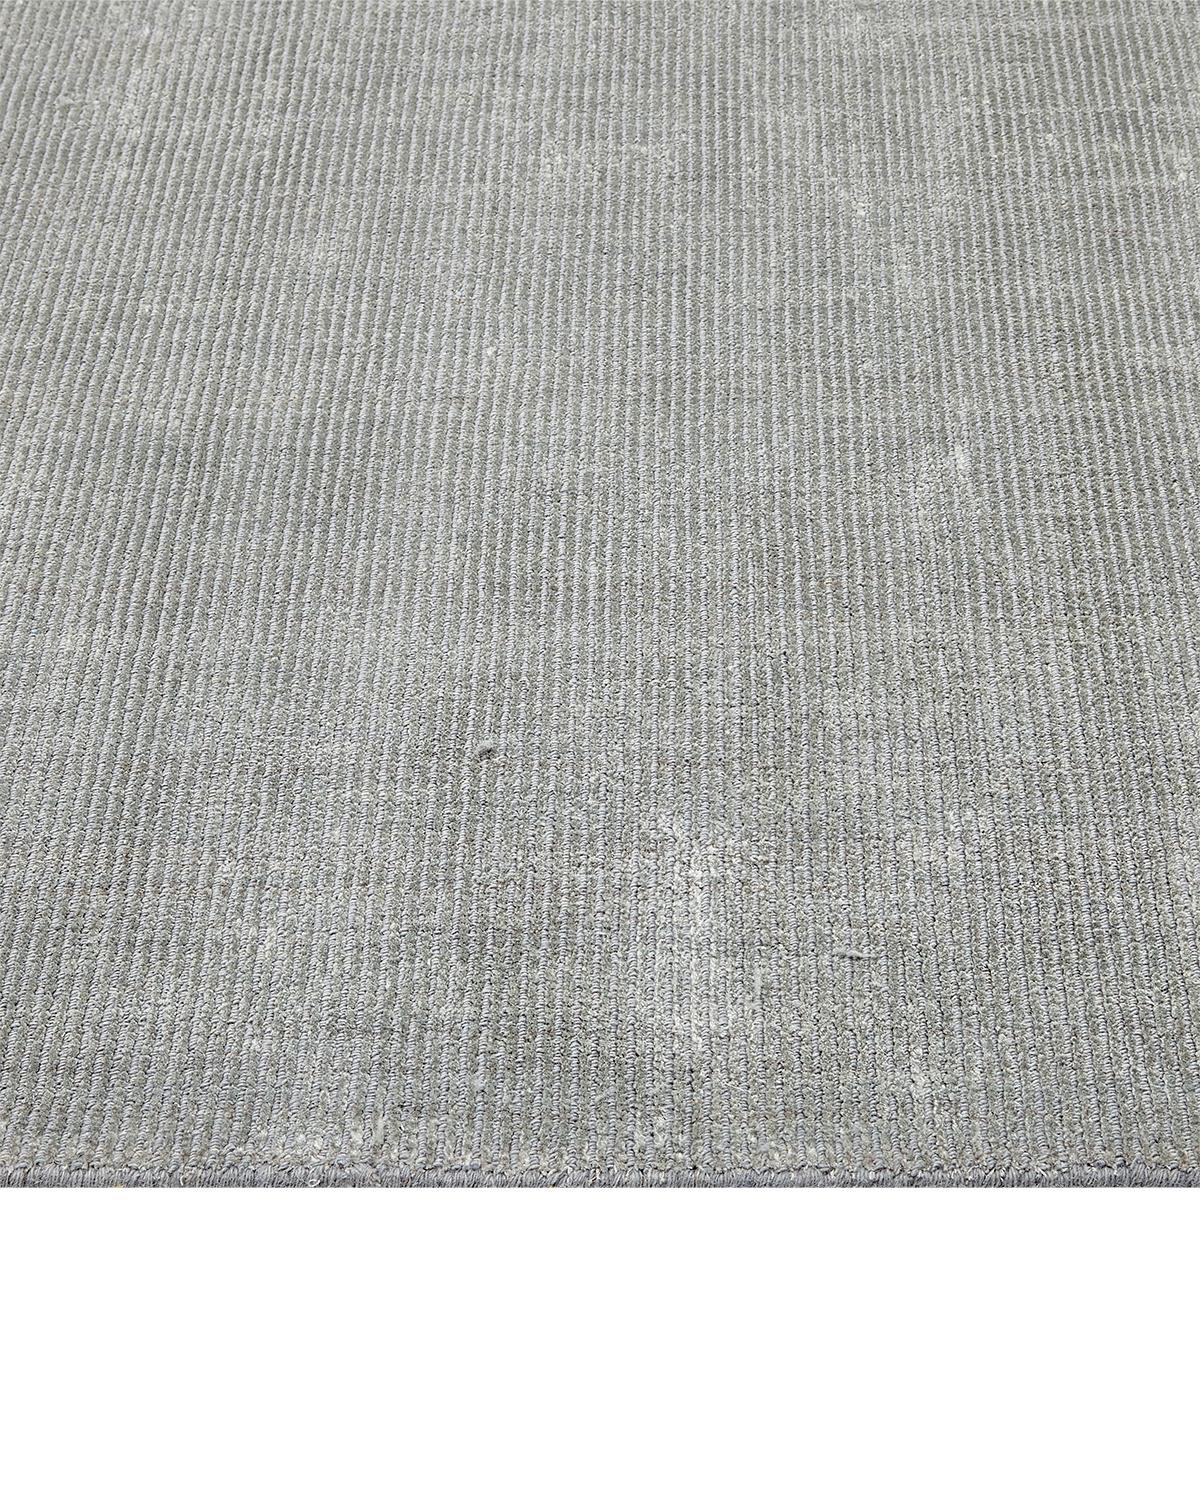 Modern Solo Rugs Cordi Contemporary Solid Handmade Runner Gray For Sale